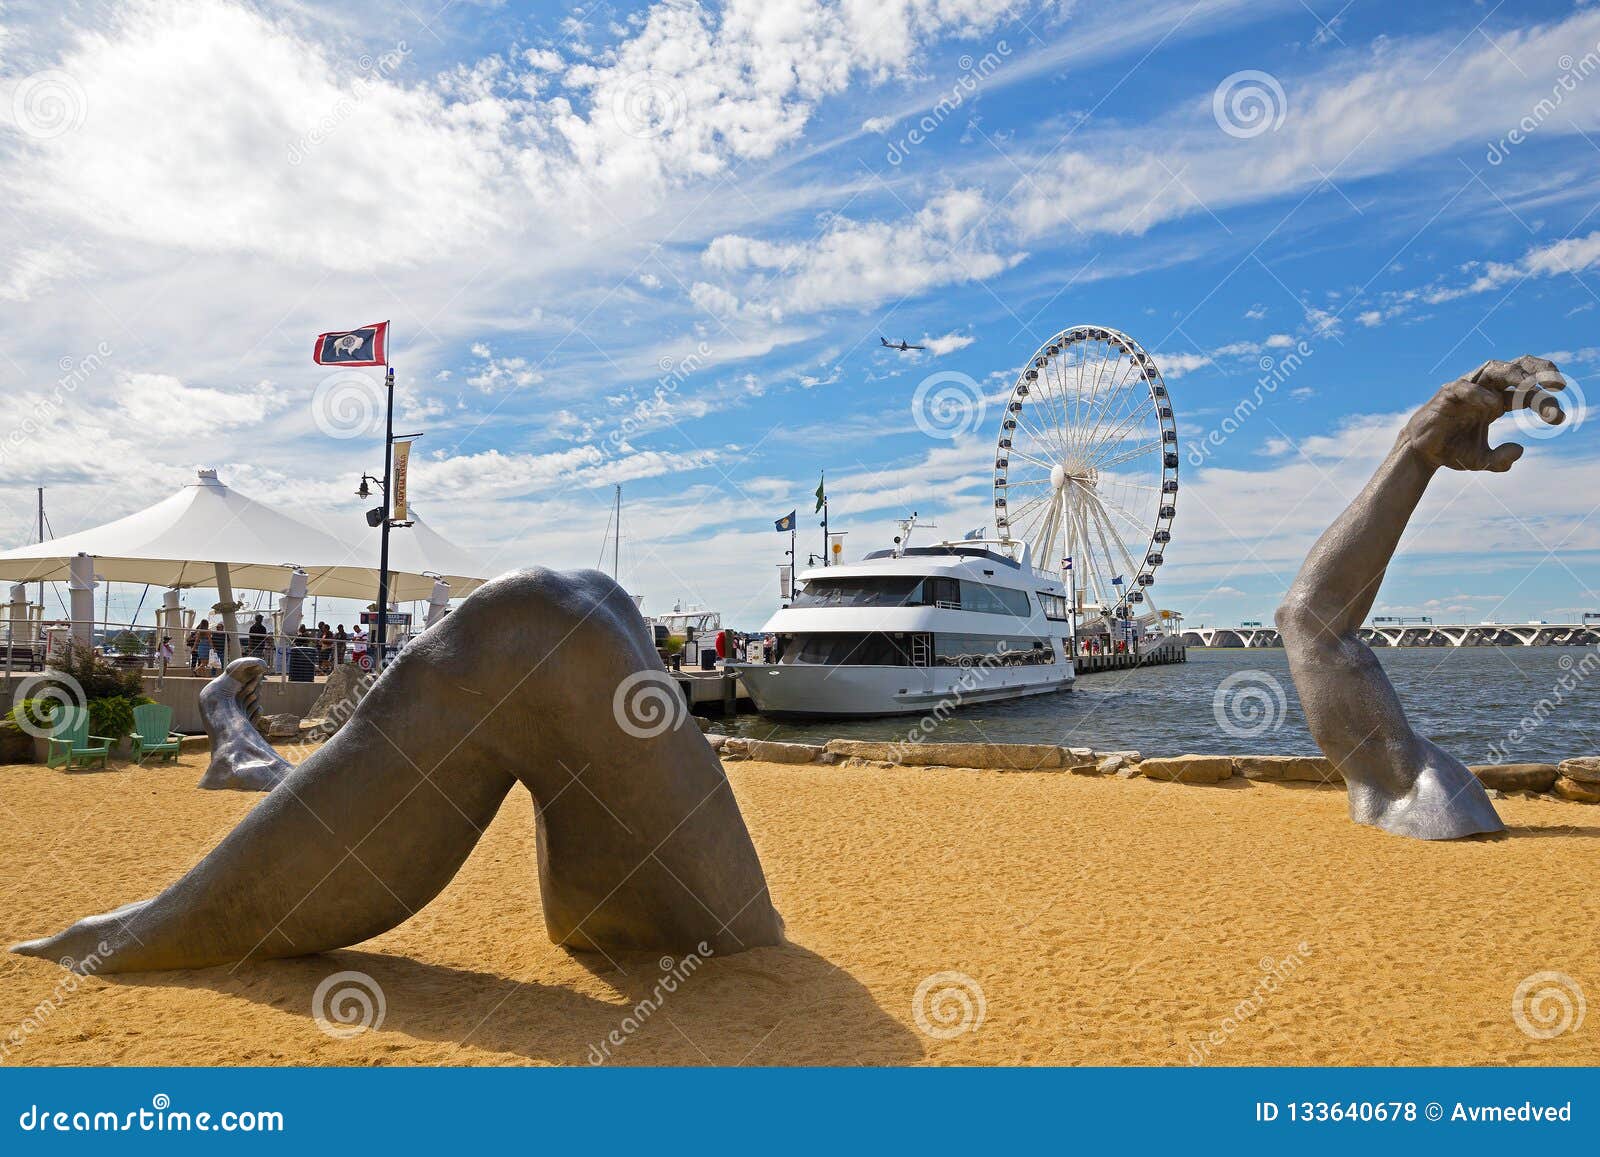 Awakening A Sculpture At National Harbor In Maryland Usa Editorial Stock Photo Image Of Created Hand